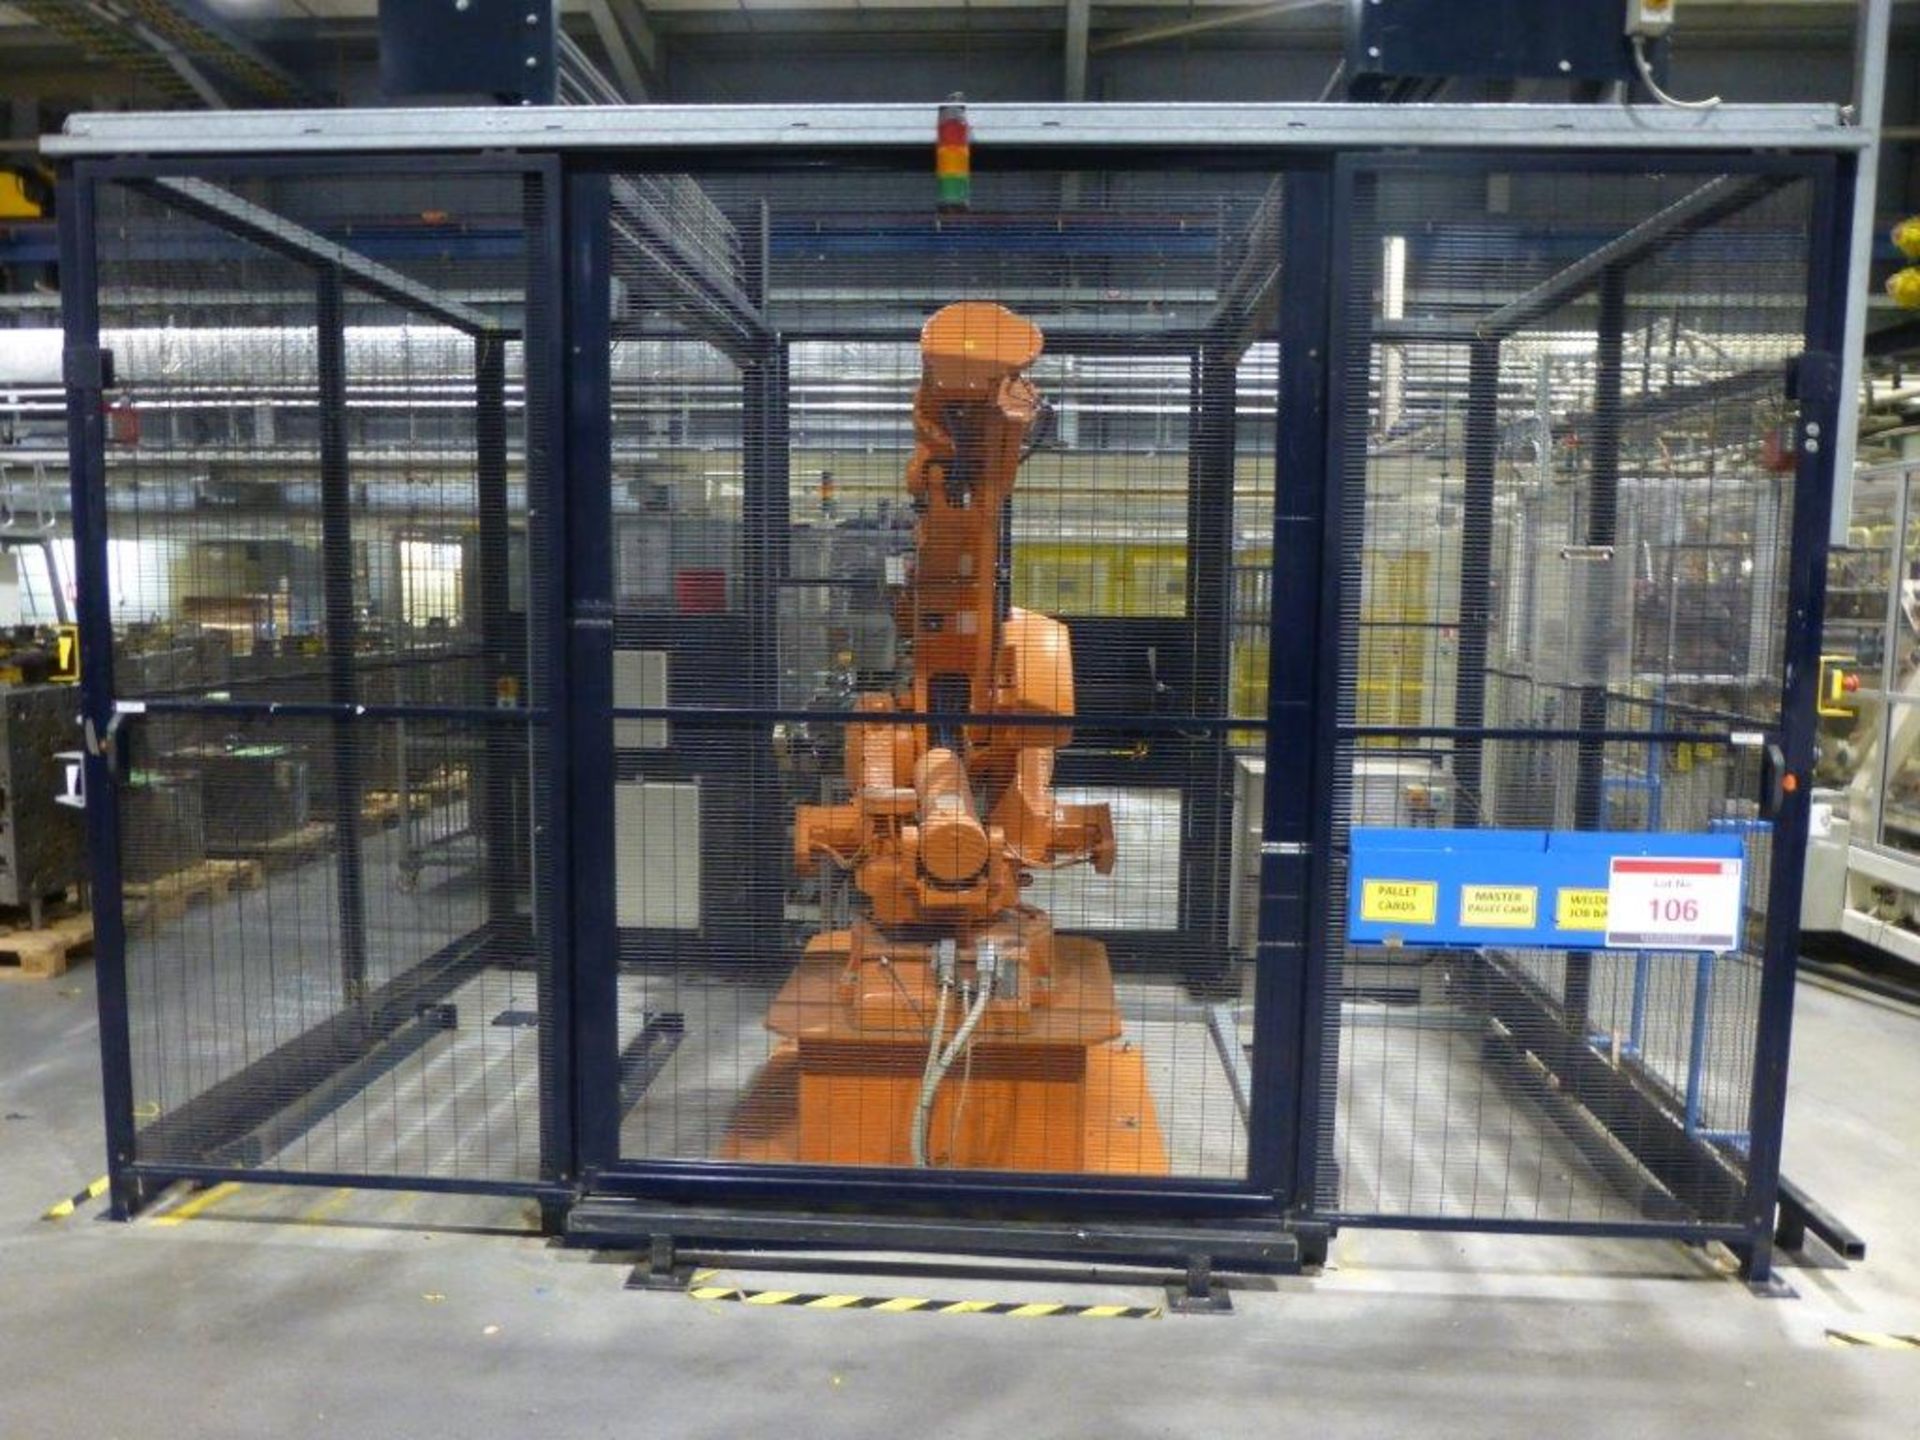 ABB IRB 4400 M2000 / IRB 4400/30 type B 110kg Pick & Place Palletising Robot Serial No. 44-27482 (